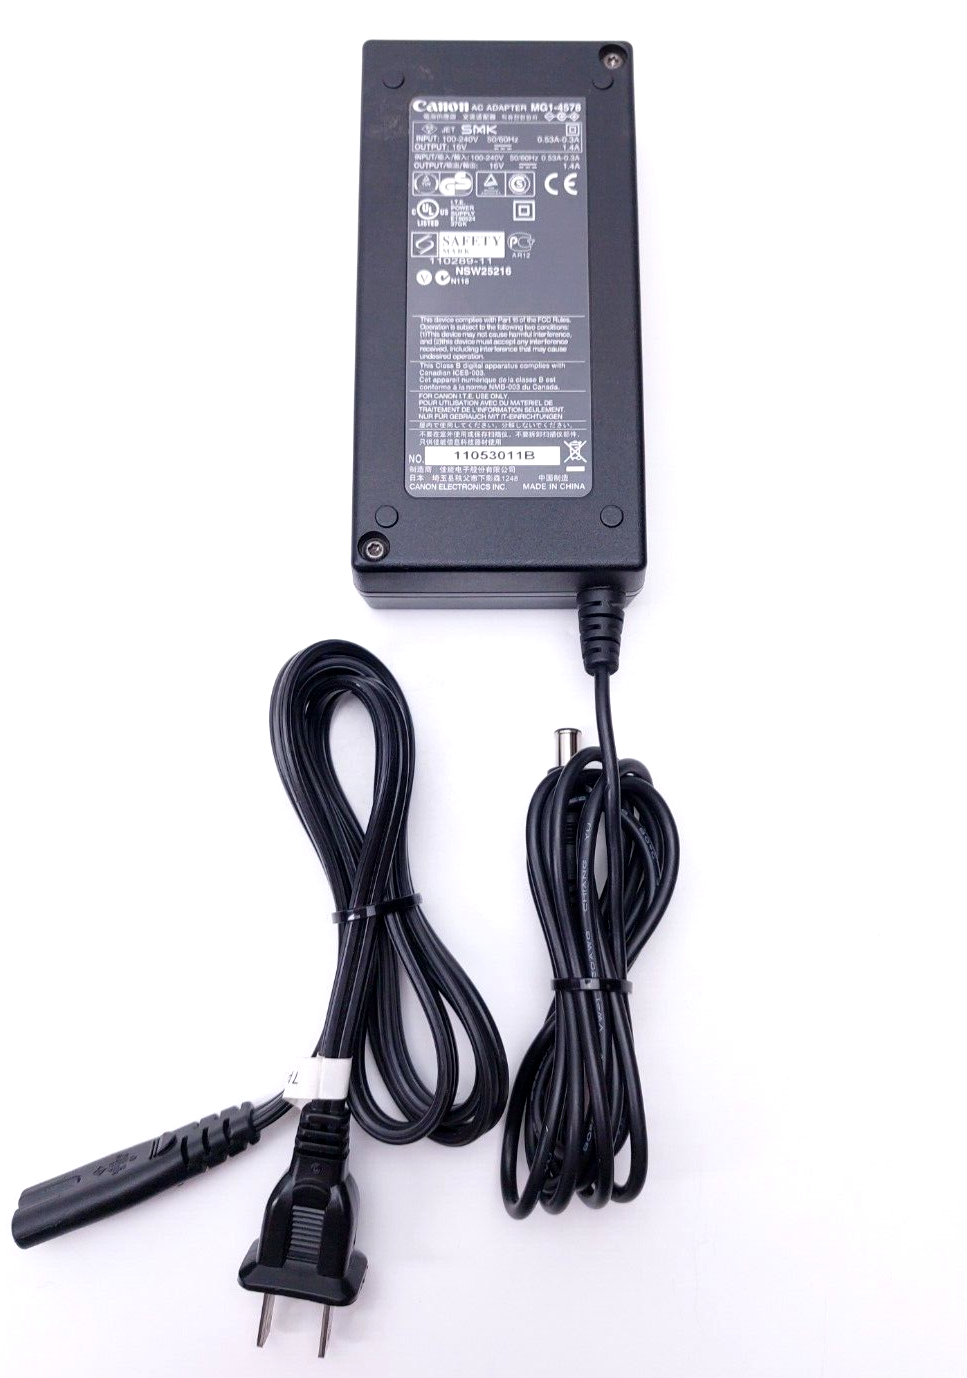 Primary image for Genuine Canon MG1-4578 AC Adapter w/ Power Cable